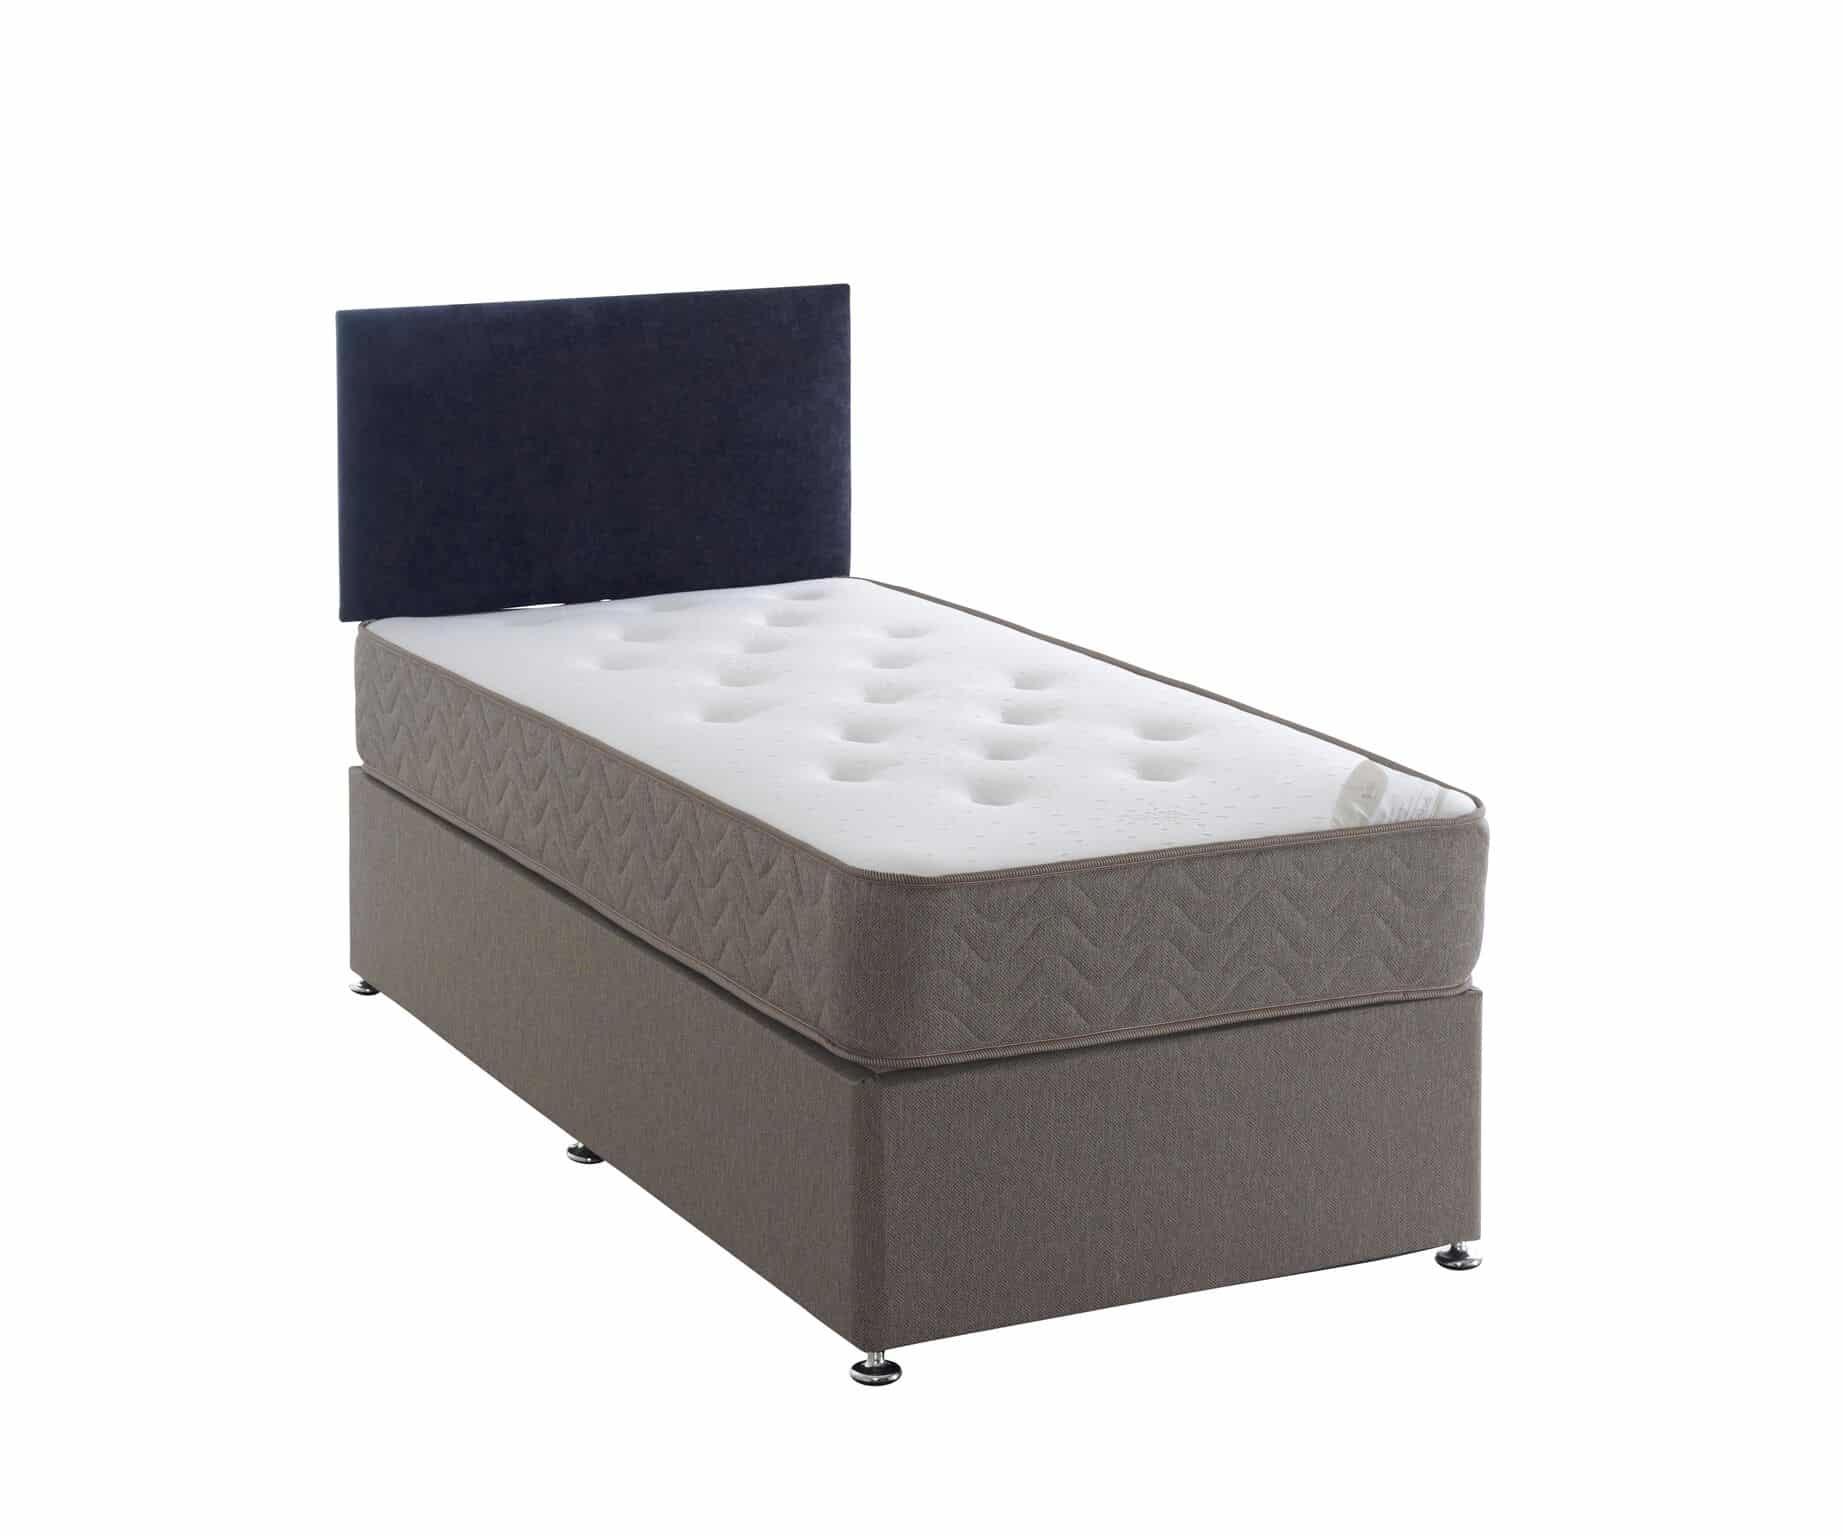 Dura Beds – Regal Divan Bed Set – Small Double – Divan Bed Base With Ortho Firm Coil Spring Unit Medium Firmness Mattress